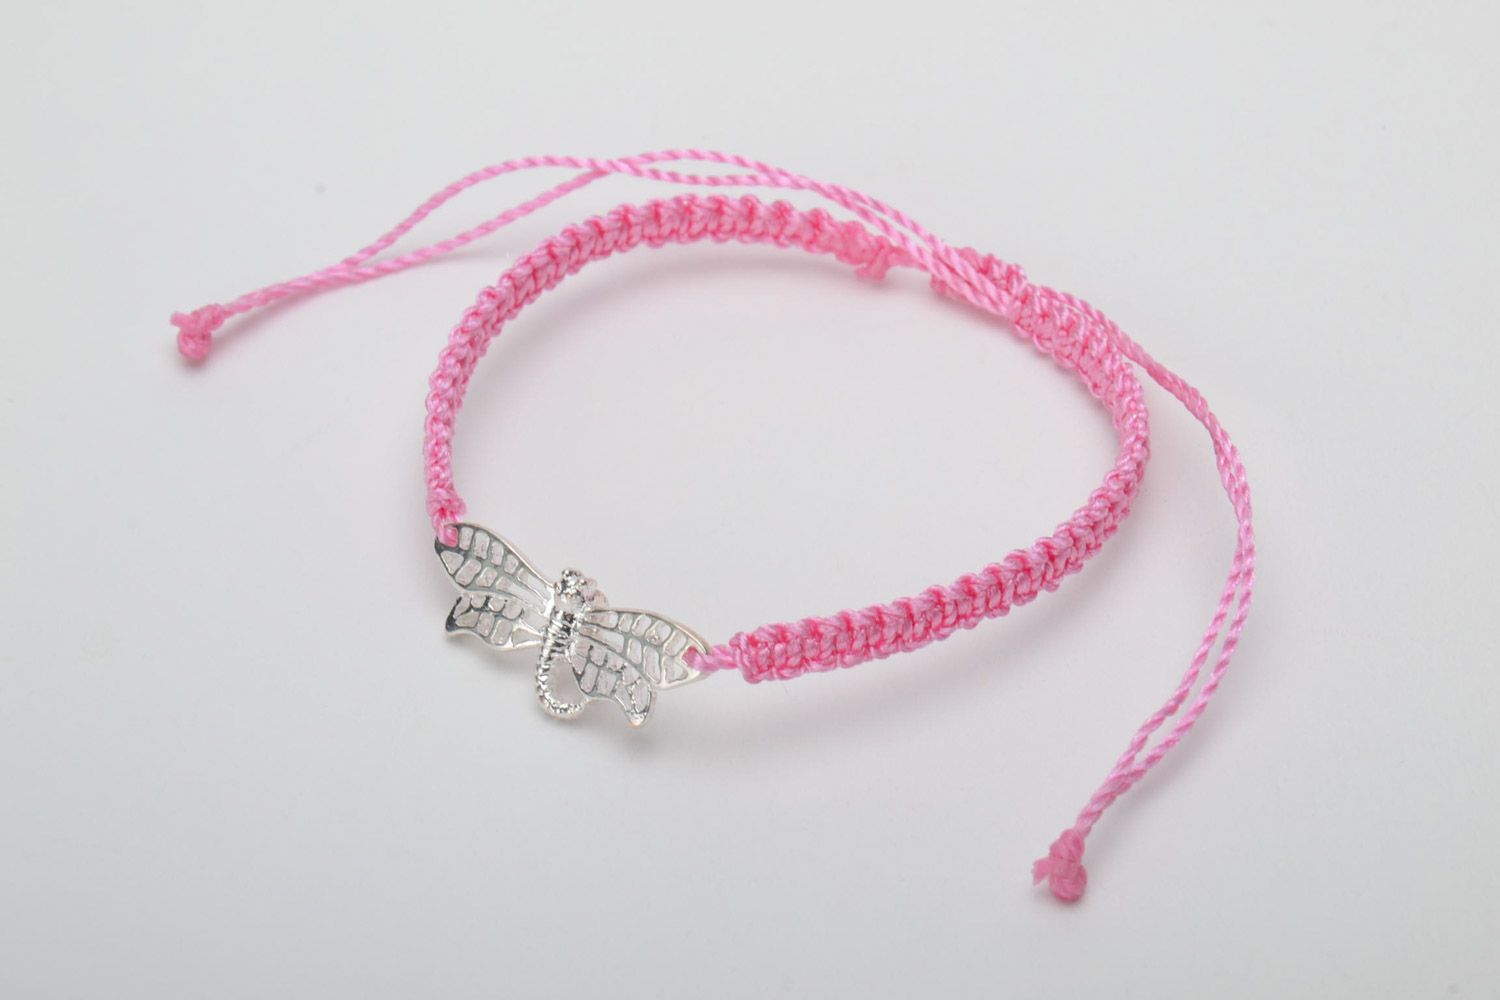 Handmade pink women's woven capron thread bracelet with metal charm in the shape of butterfly photo 3